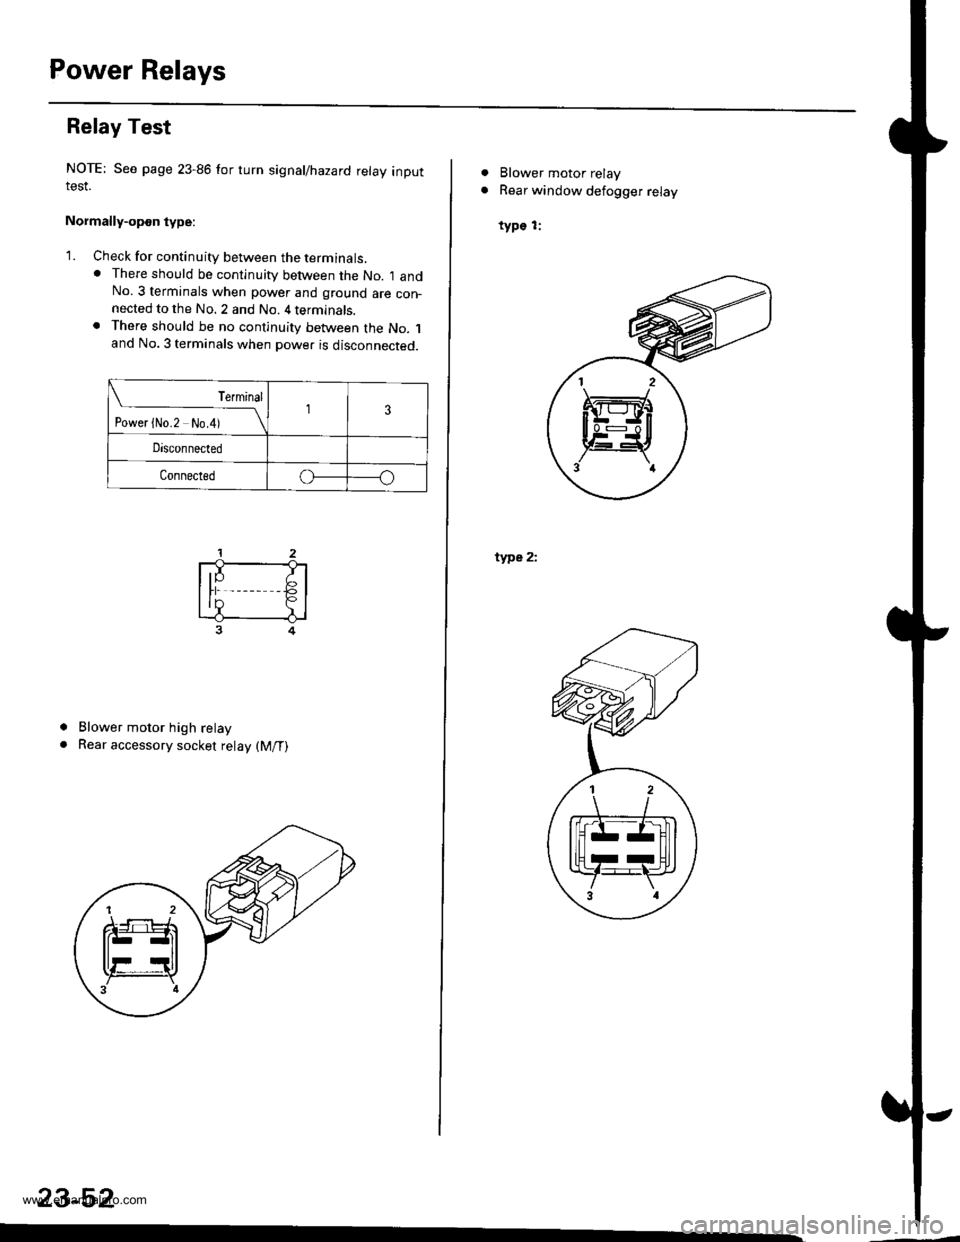 HONDA CR-V 1999 RD1-RD3 / 1.G Workshop Manual 
Power Relays
Relay Test
NOTE: See page 23-86 for turn signal/hazard relay inputIESI.
Normally-opon type:
1. Check for continuity between the terminats.. There should be continuity between the No. I 